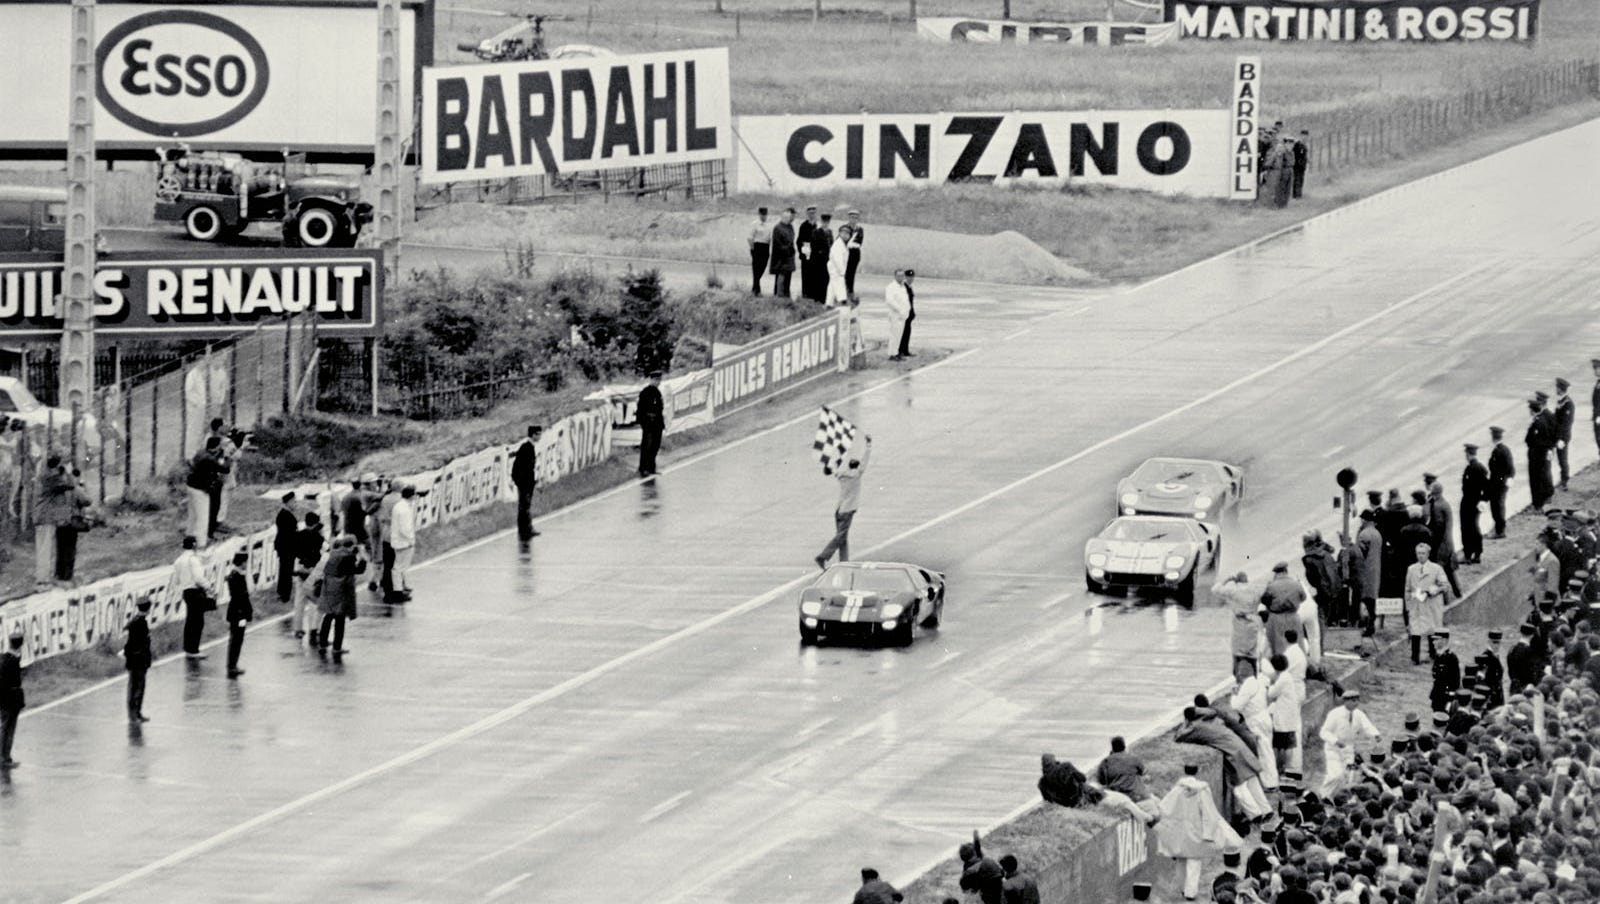 At the 1966 24 Hours of Le Mans race, two Ford GT40 Mark II cars were close at the finish line, with the  Bruce McLaren and Chris Amon car declared the winner. It was the first win at Le Mans for an American car.